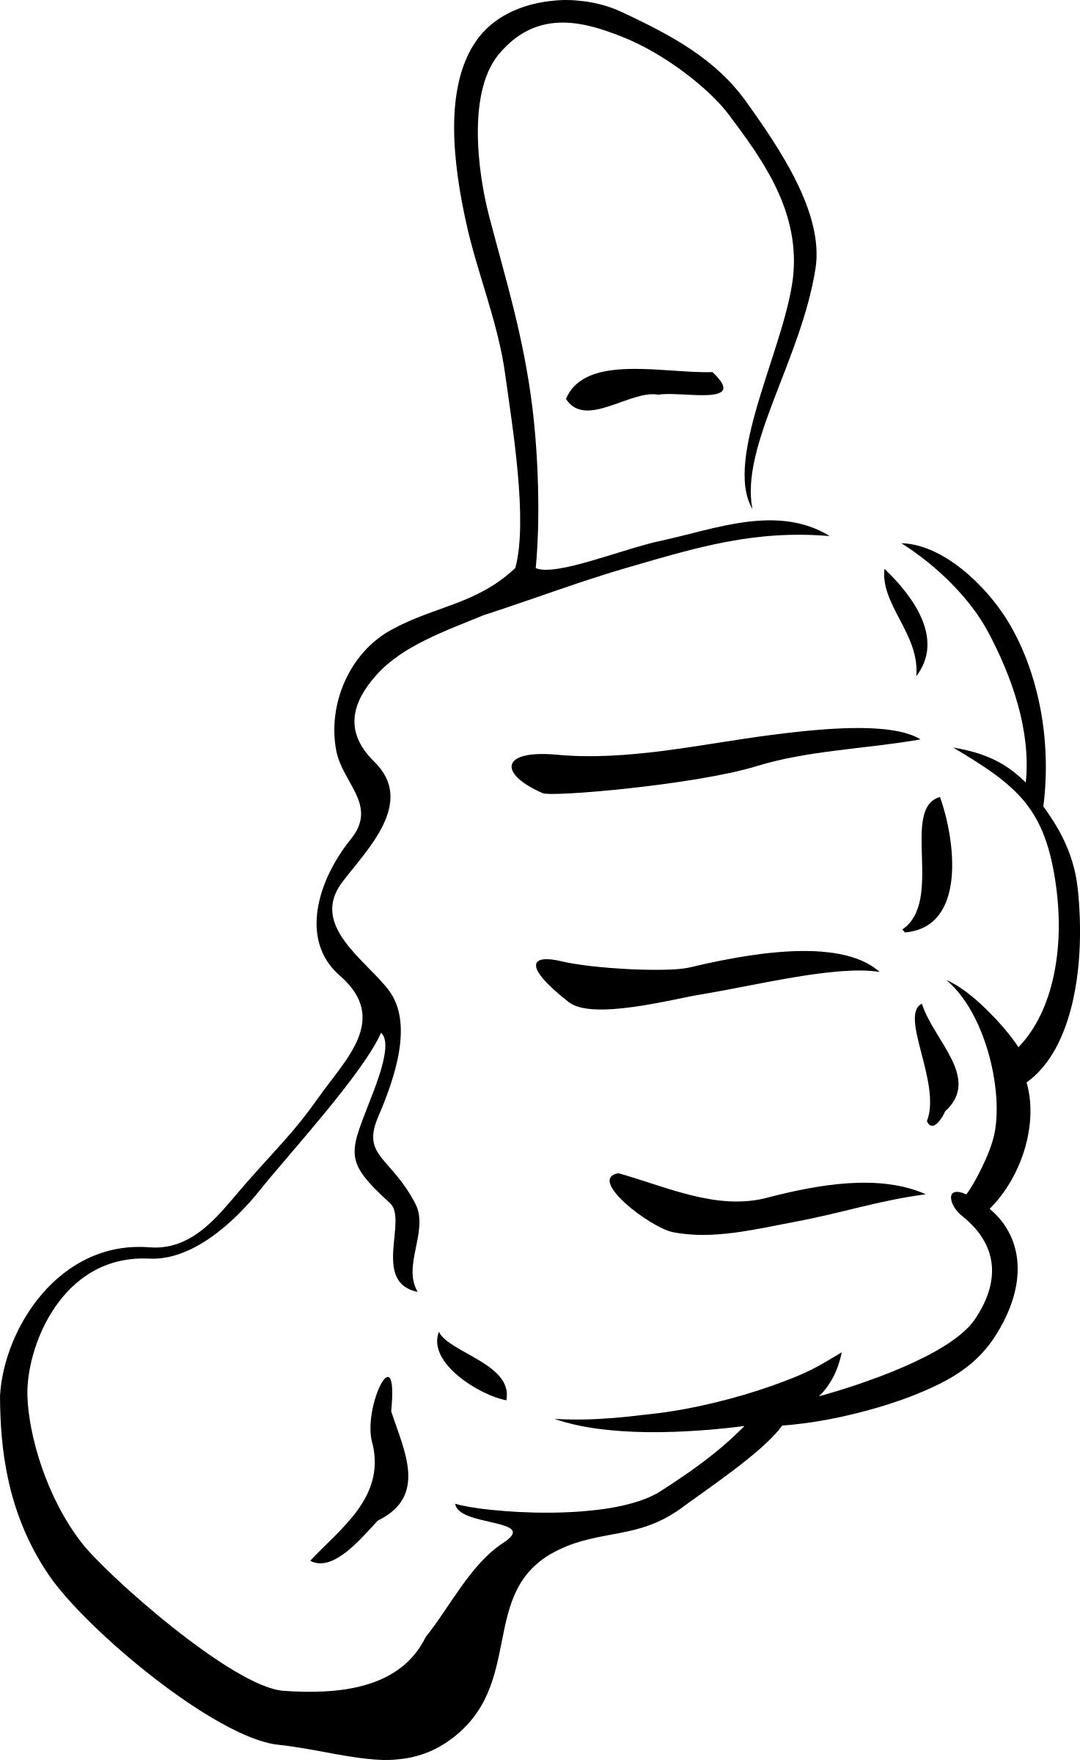 Thumb Up! with arm png transparent